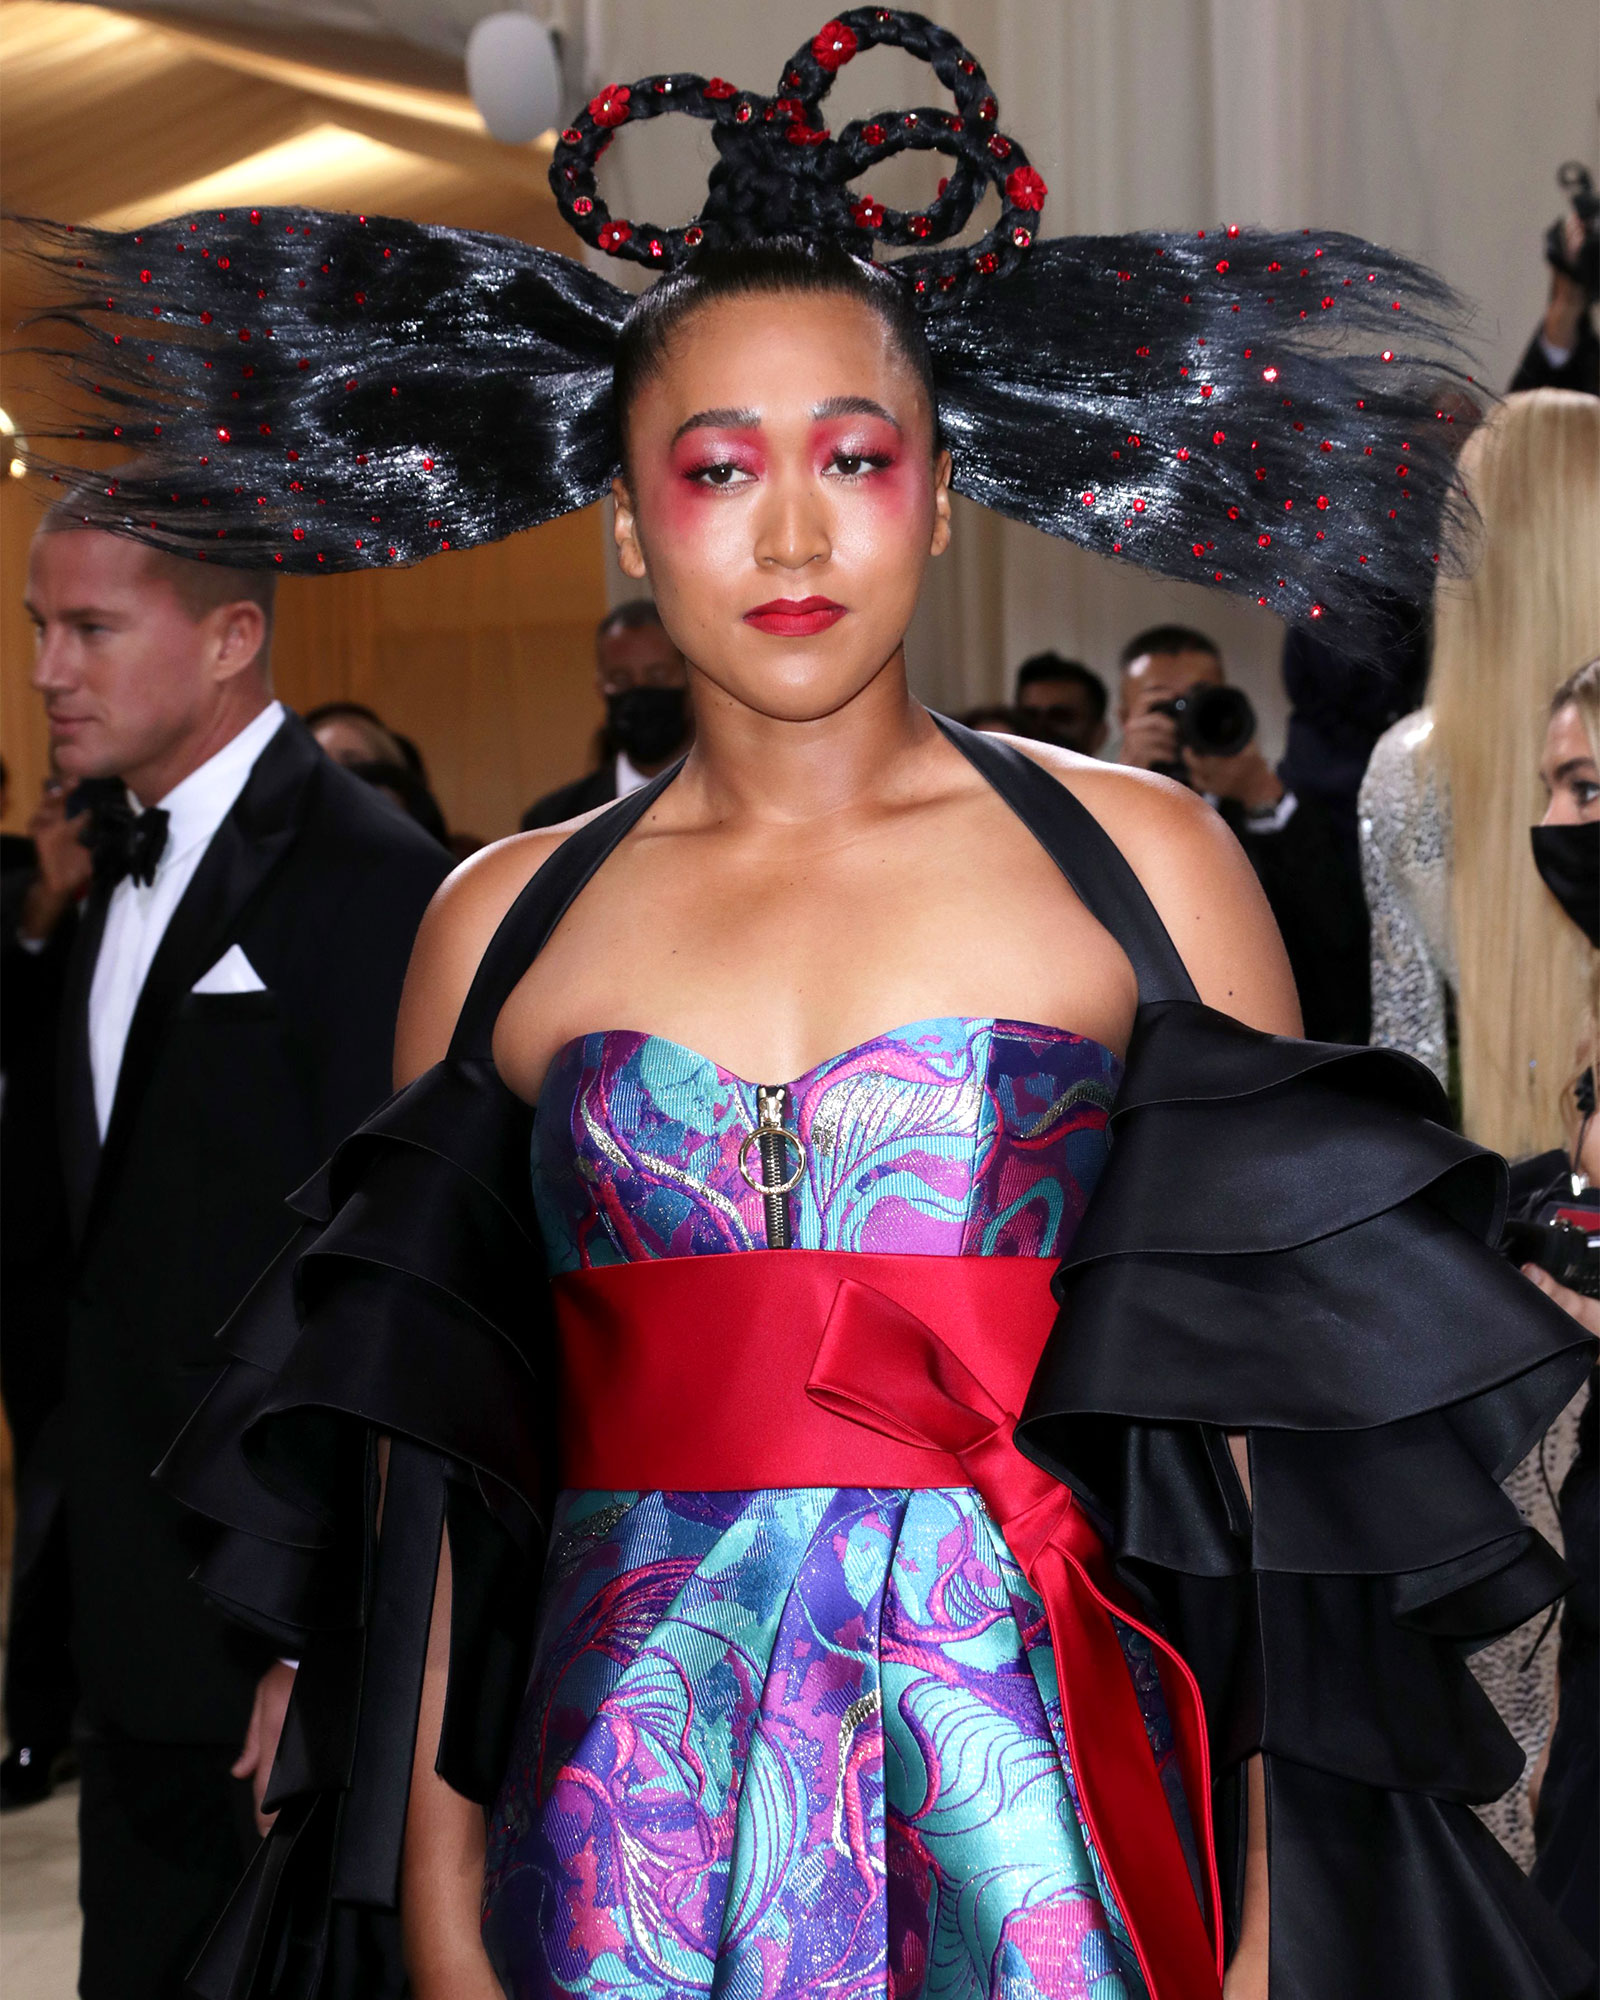 Naomi Osaka Adds Red Flowers & Crystals To Her Hair For Met Gala